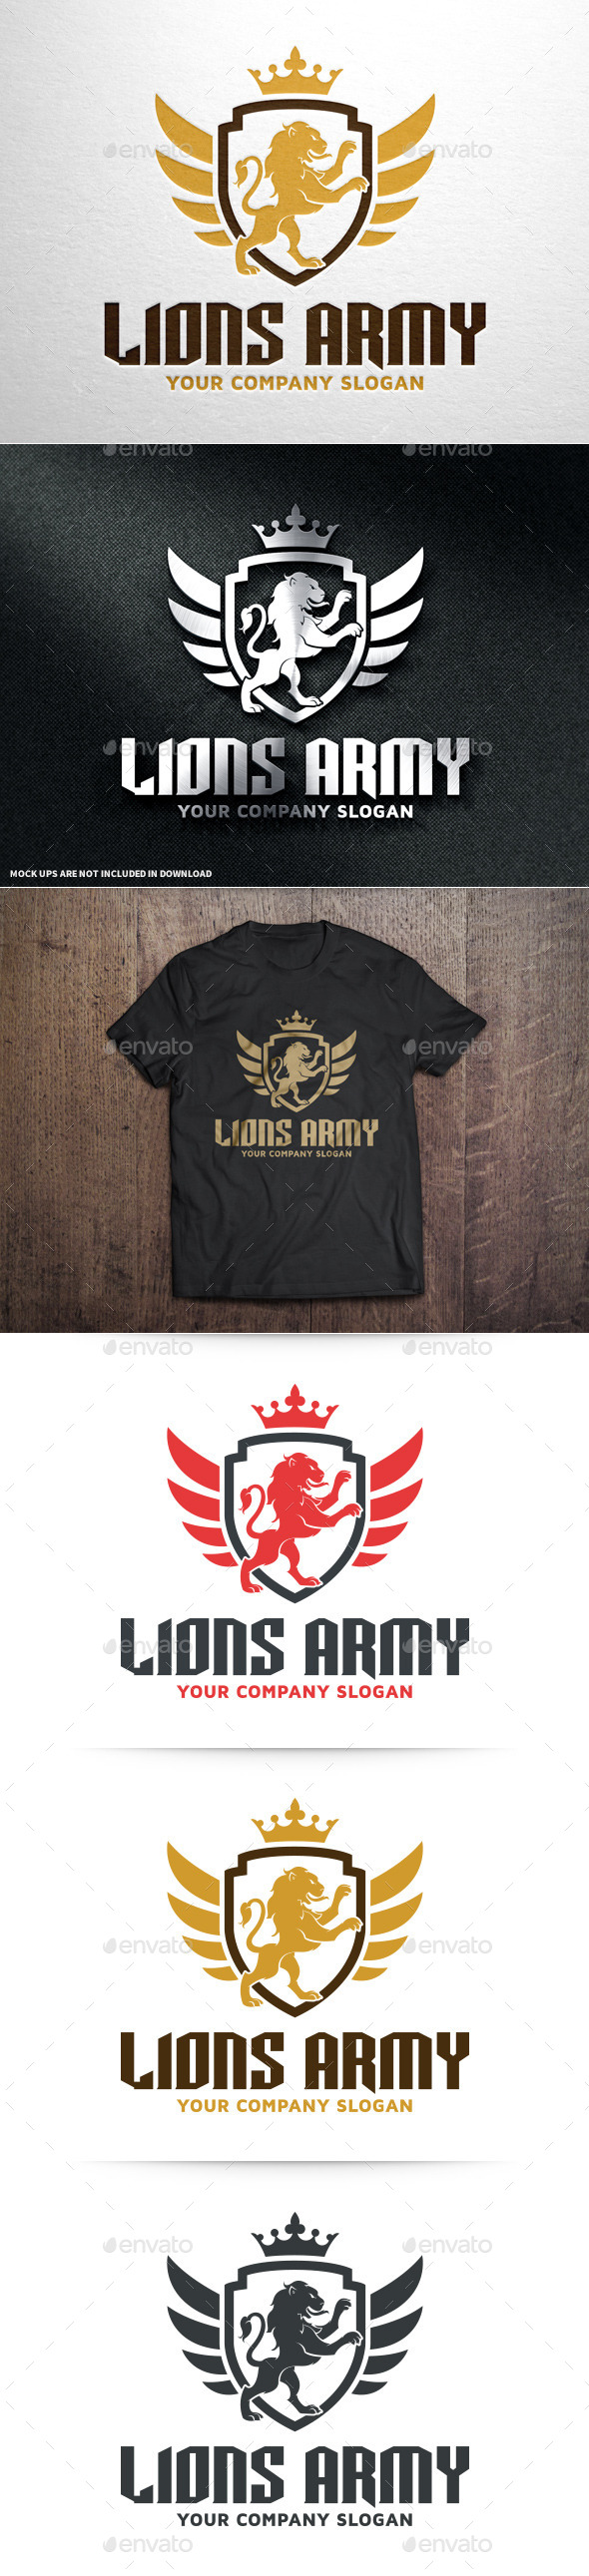 Lions Army Logo Template